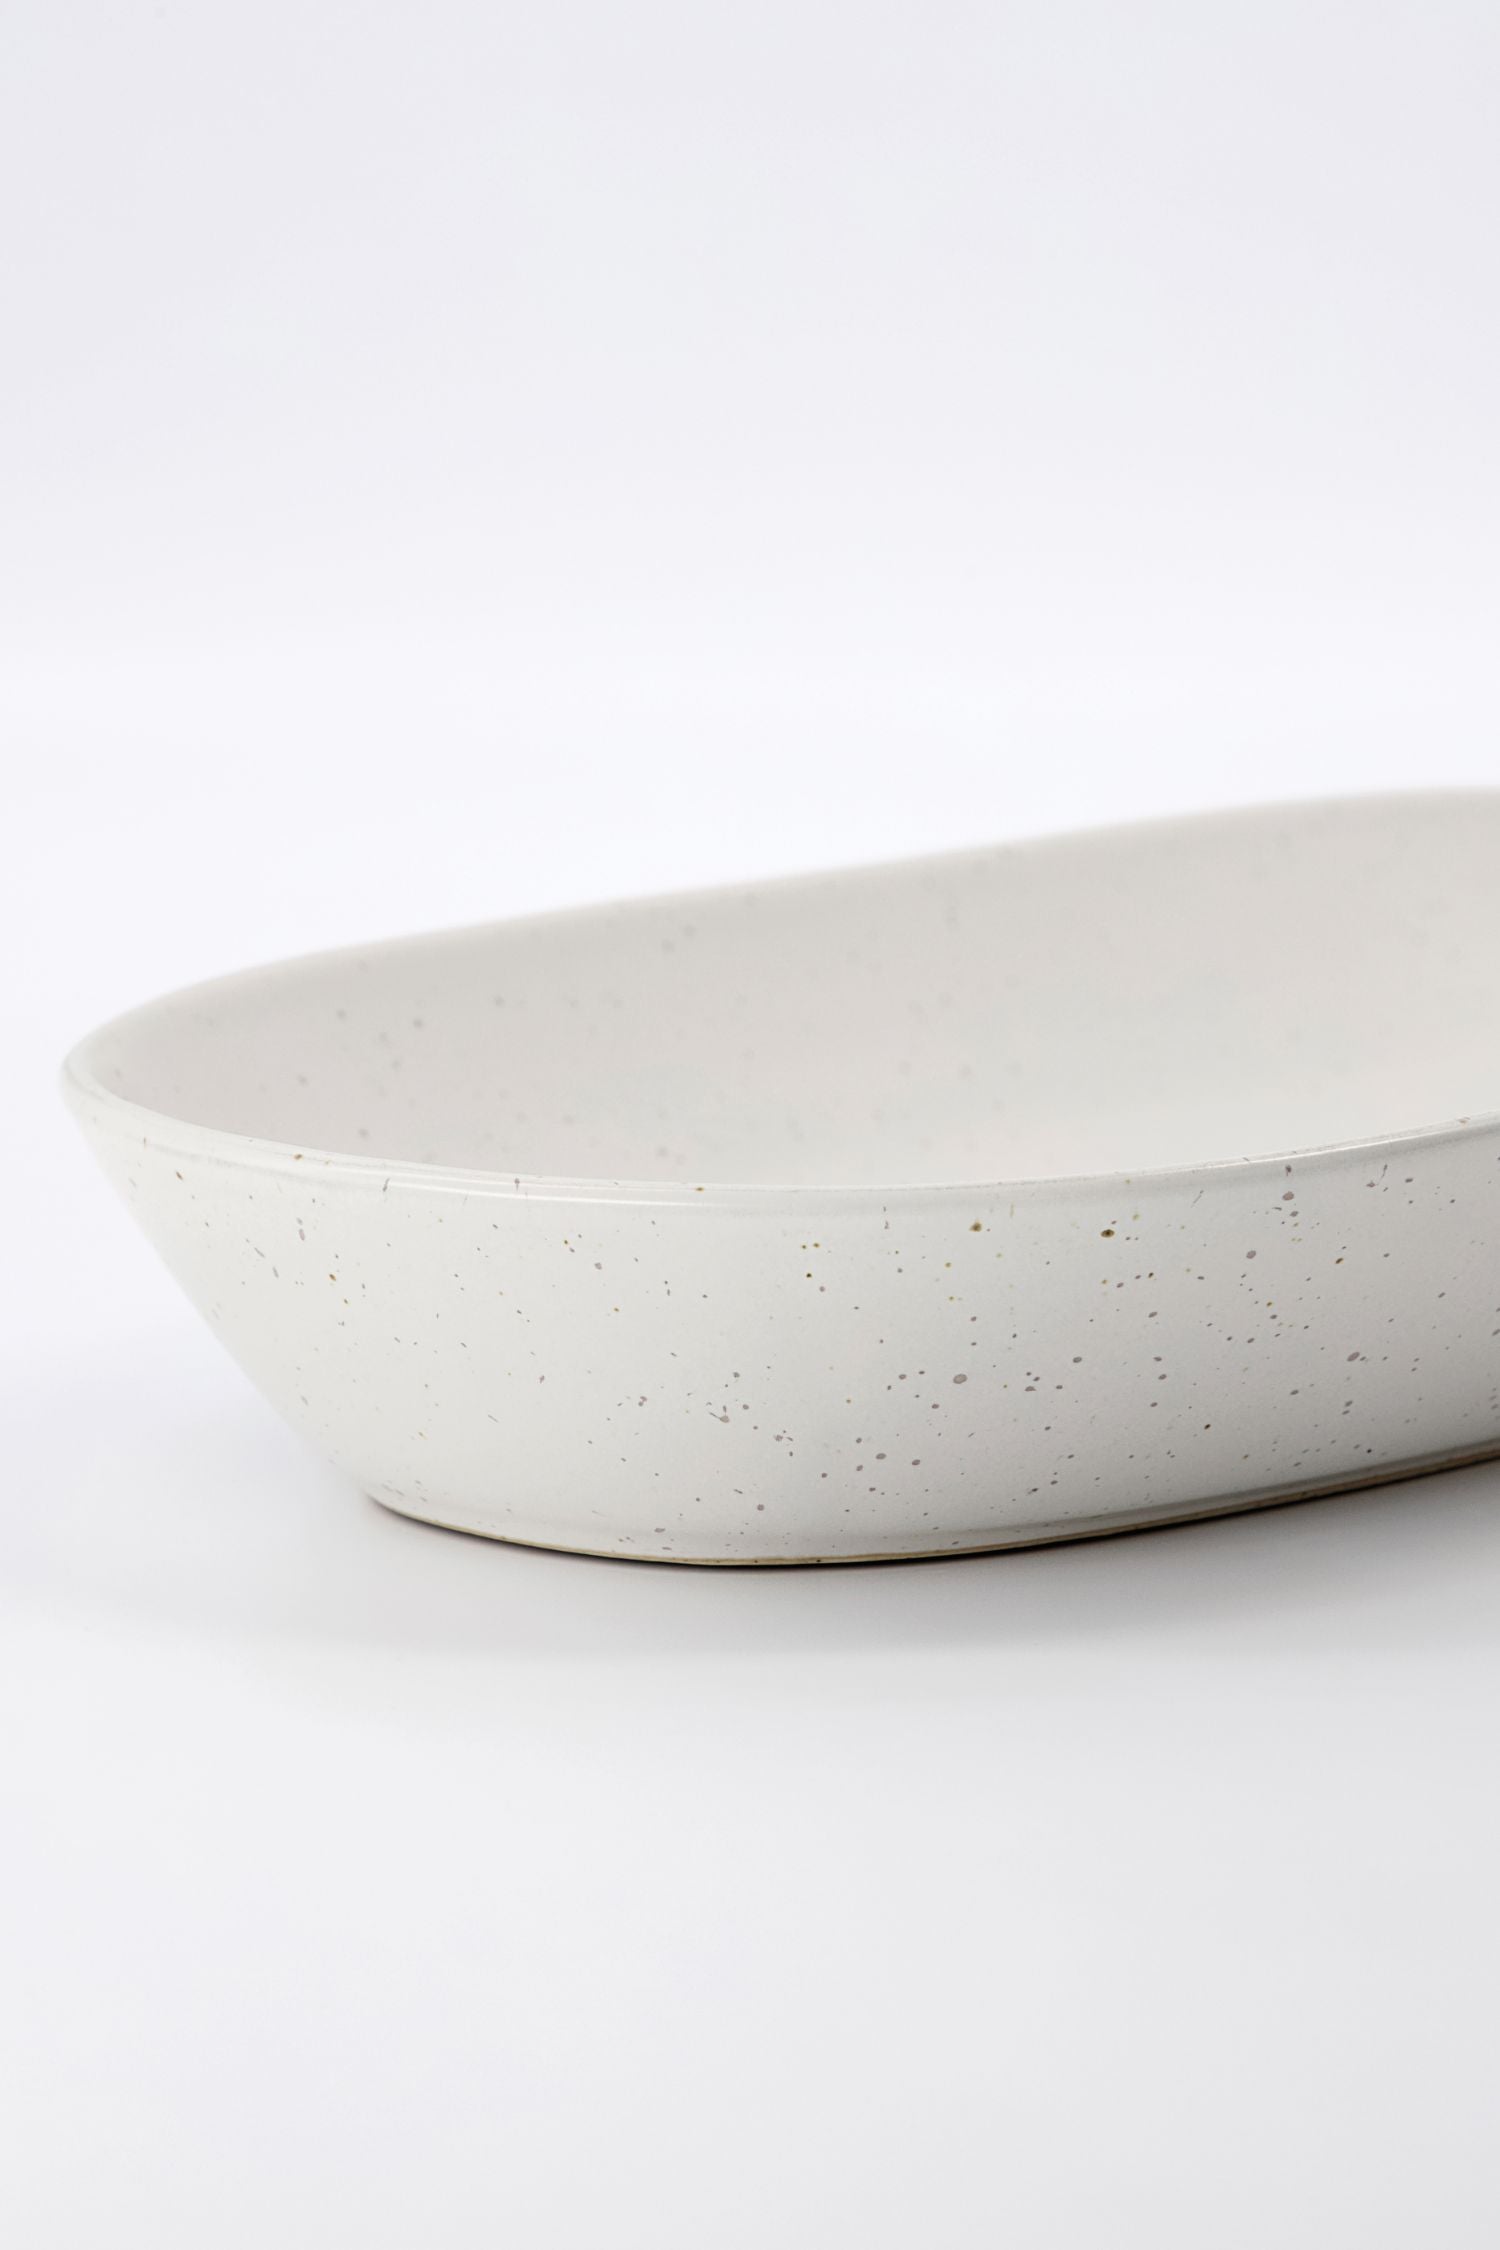 pion low serving dish off white